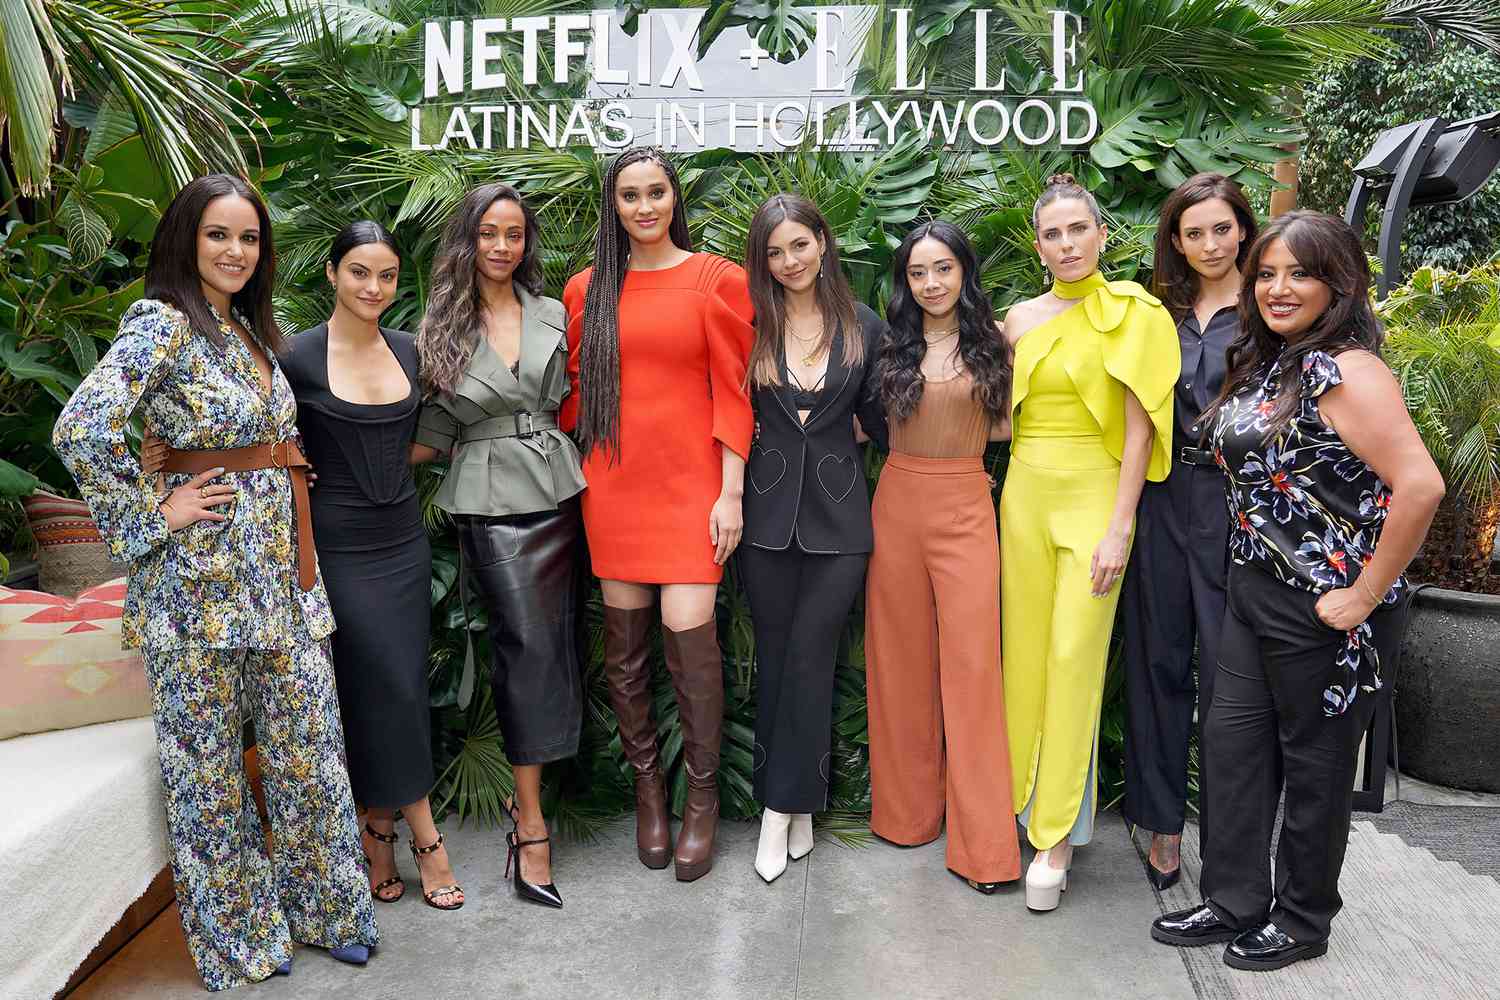 LOS ANGELES, CALIFORNIA - OCTOBER 16: (L-R) Melissa Fumero, Camila Mendes, Zoe Saldana, Lee Rodriguez, Victoria Justice, Aimee Garcia, Karla Souza, Génesis Rodríguez and Cristela Alonzo attend Netflix and Elle's Celebration of Latinas in Hollywood at Ka’teen on October 16, 2022 in Los Angeles, California. (Photo by Presley Ann/Getty Images for Netflix)